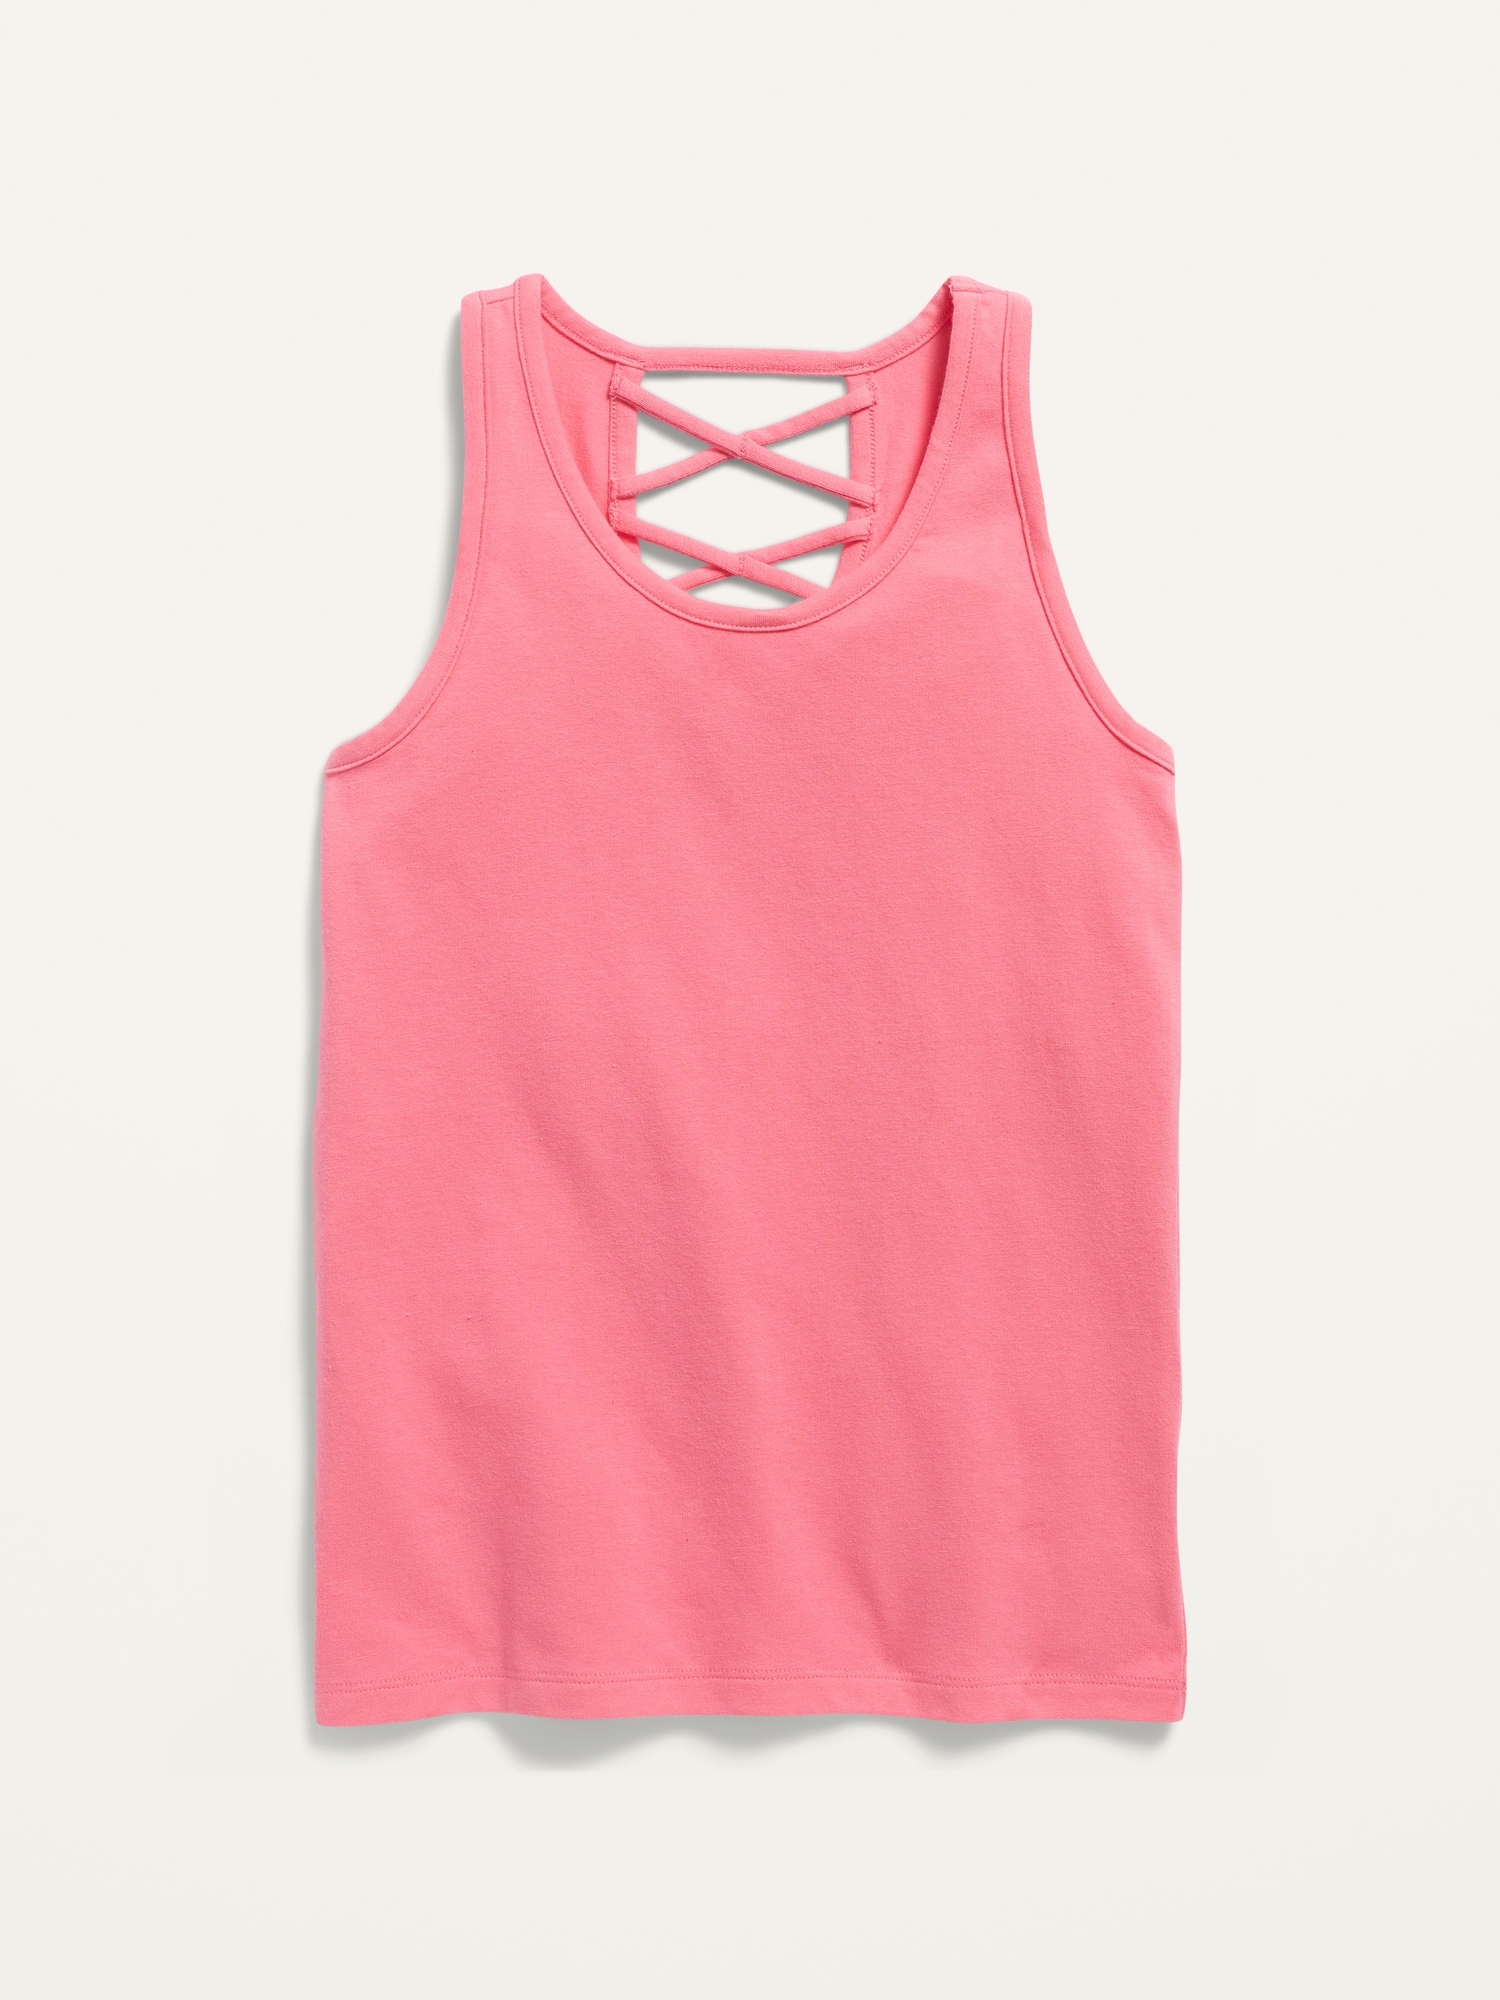 Fitted Strappy Tank Top for Girls | Old Navy